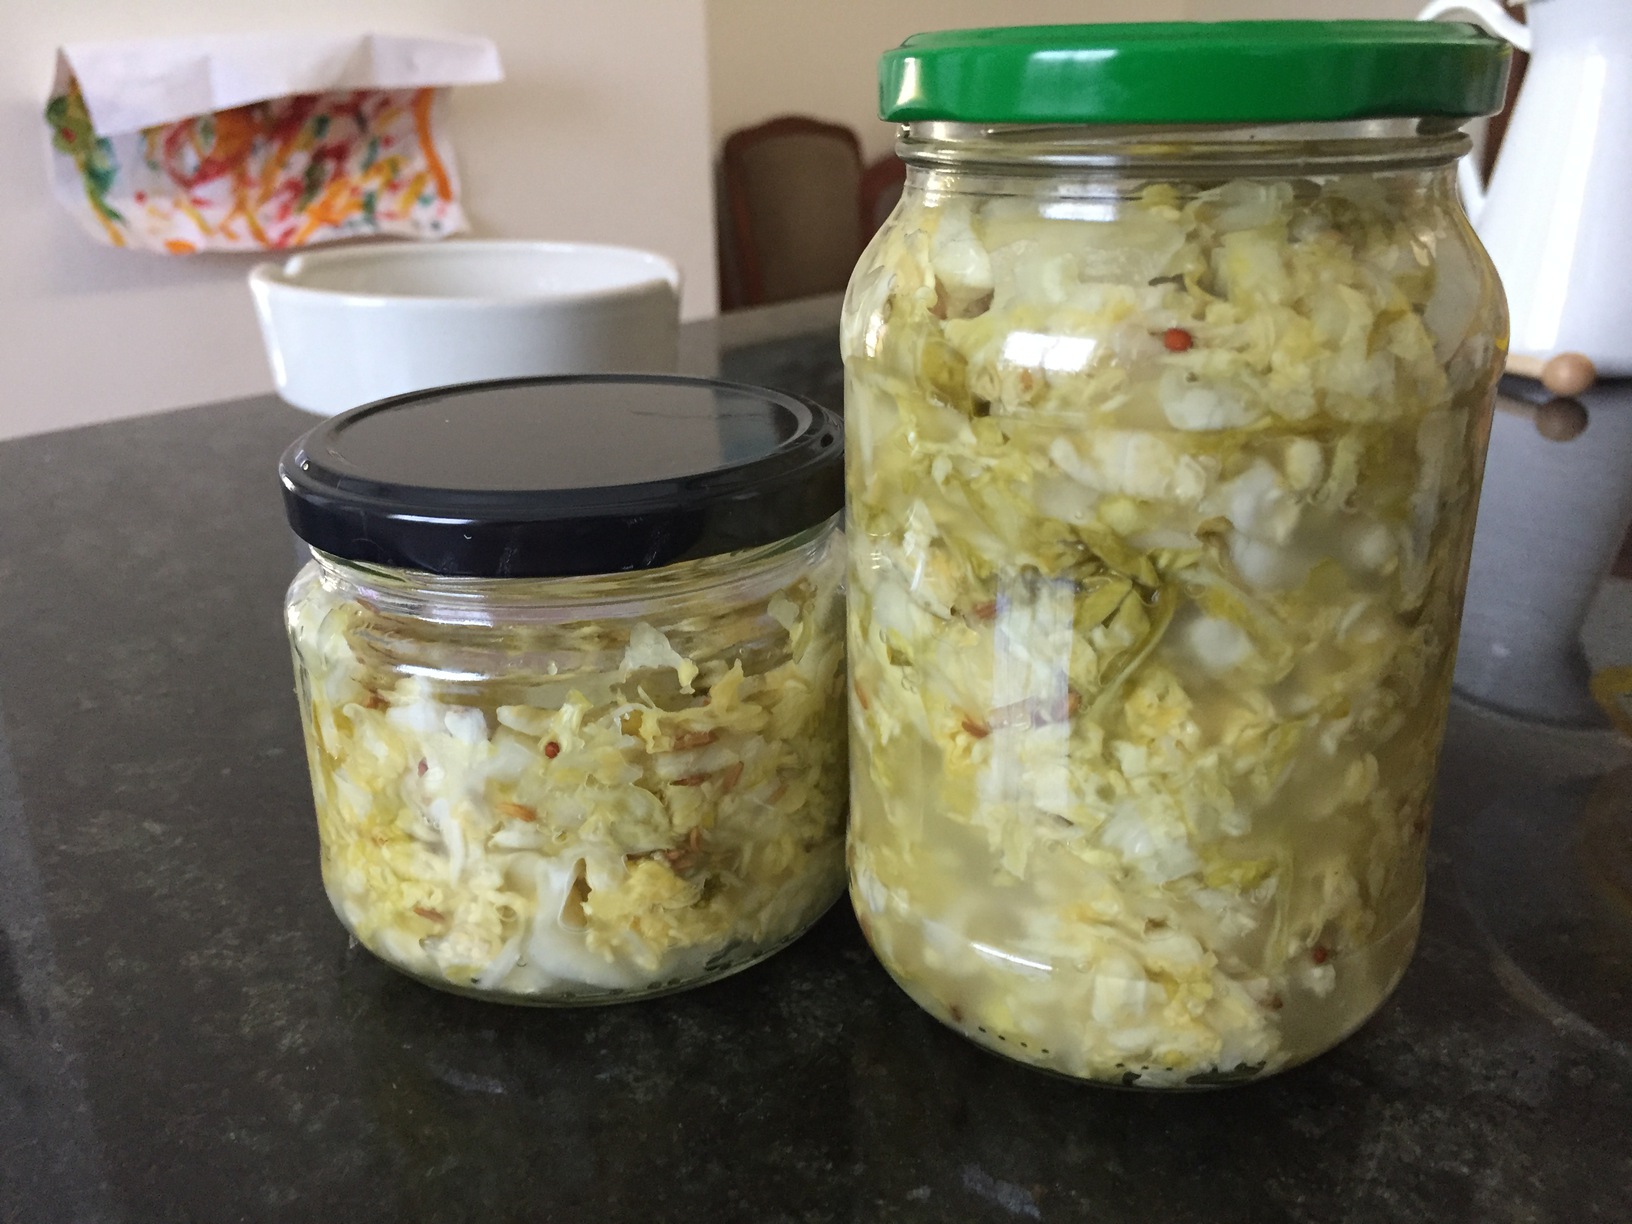 I only used a small cabbage, so the net result was two jars of sauerkraut, which was the perfect amount for all the Reuben sandwiches made with the corned beef